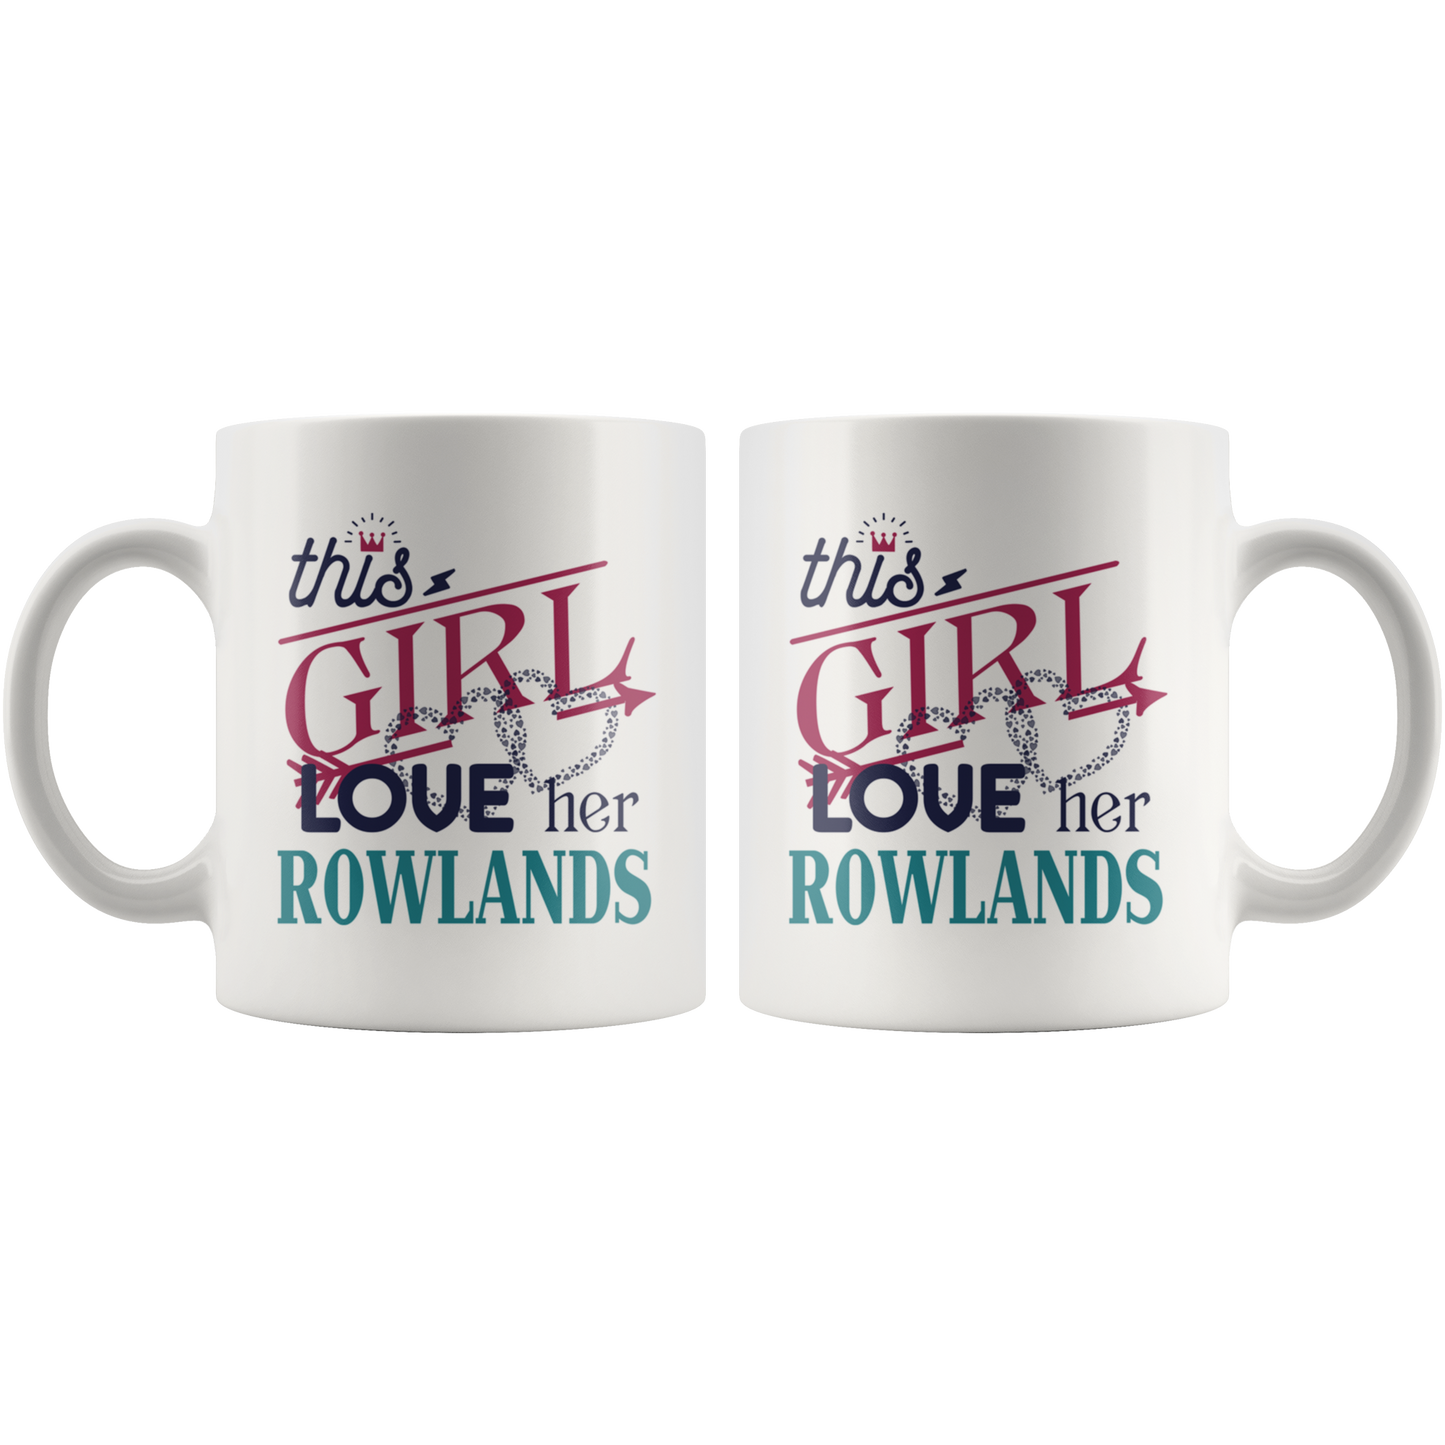 ND-9620533564-sp-18186 - Funny Christmas Mug Gifts for Her, Wife - This Girl Love Her